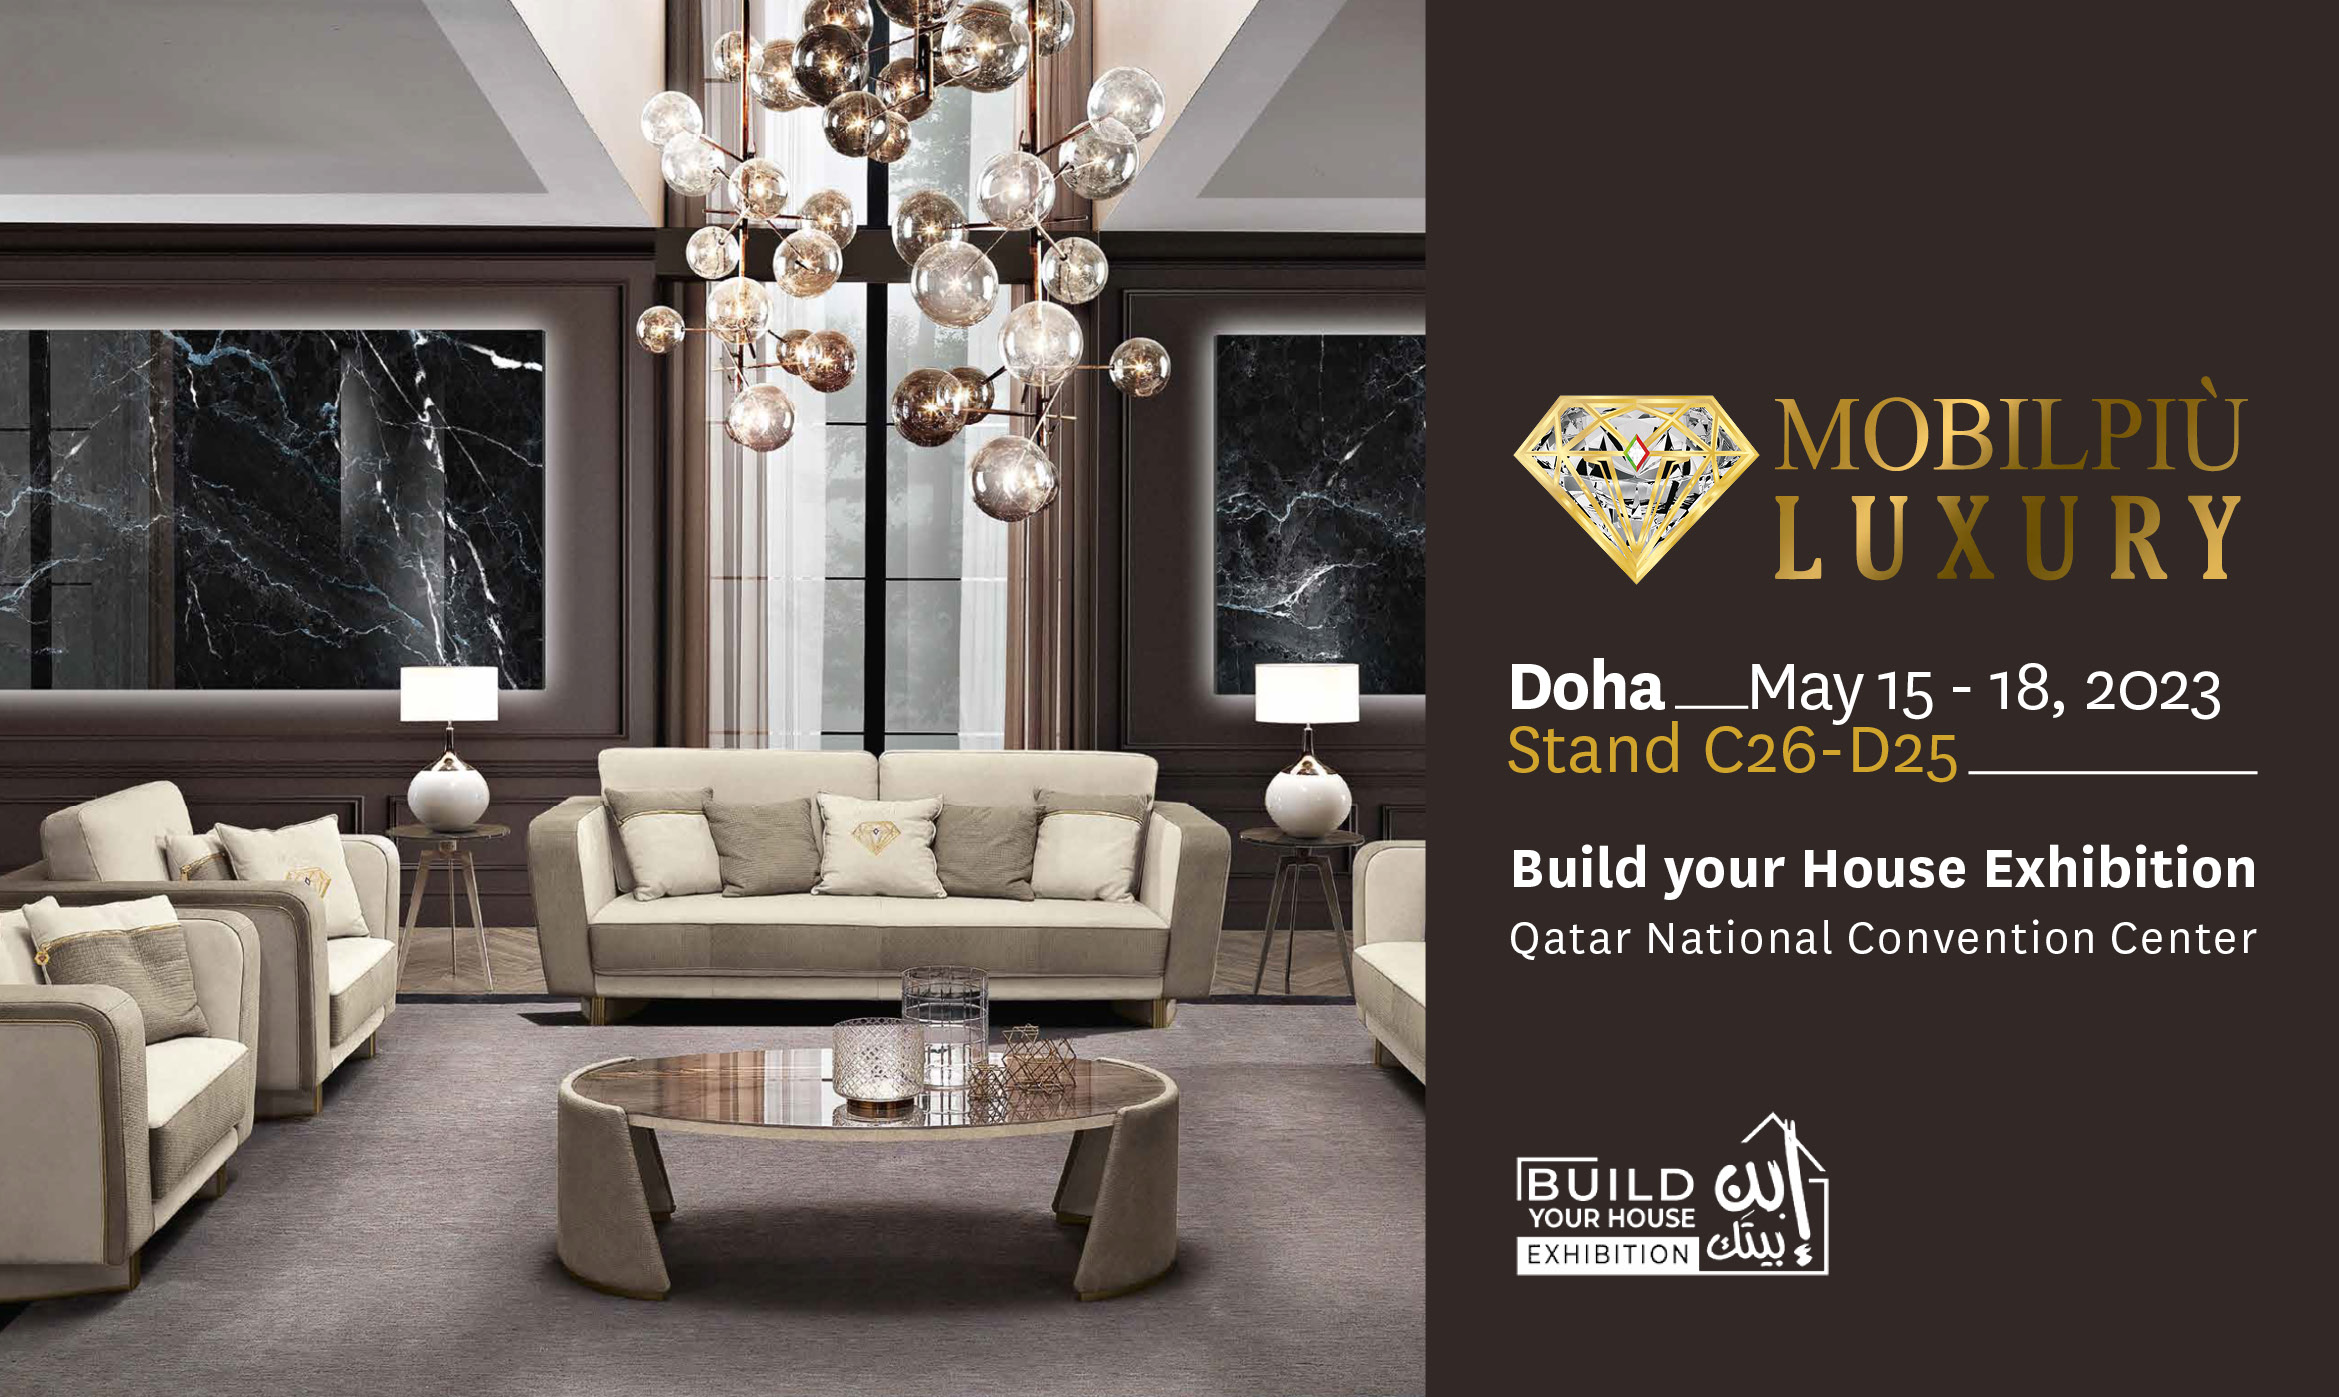 Build your House Exhibition - Doha 2023